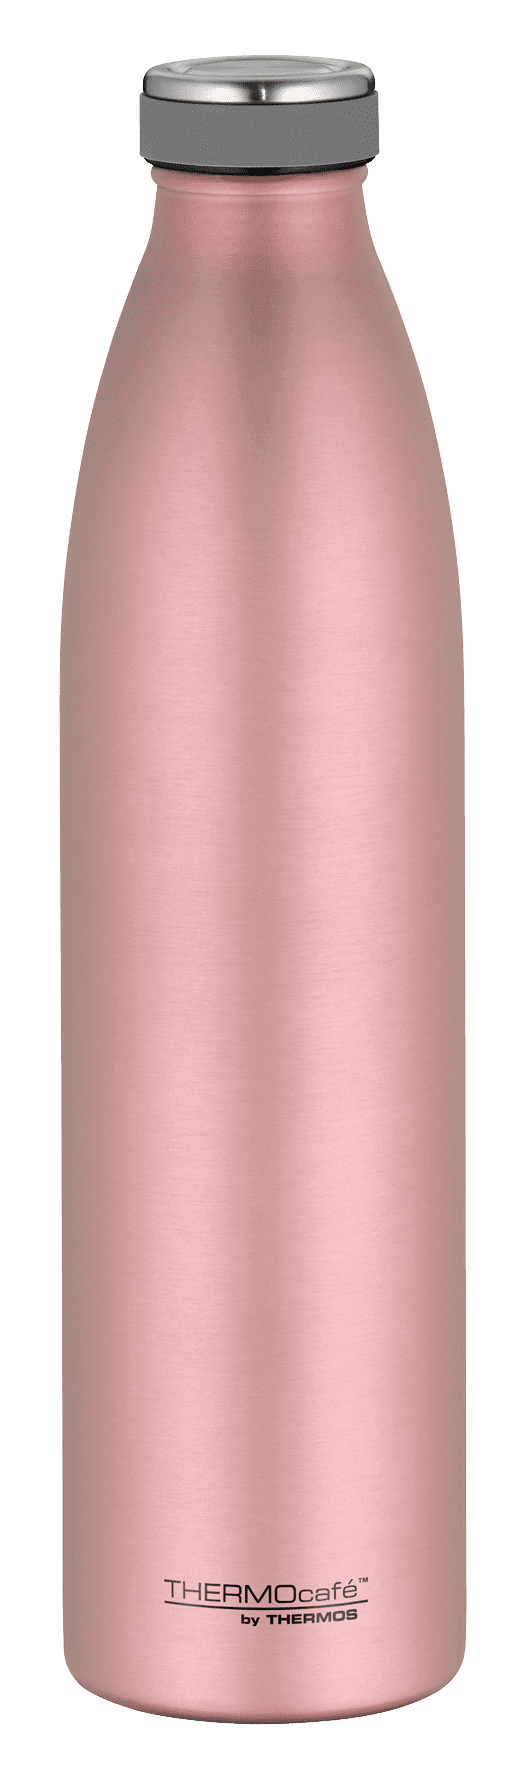 Thermos Thermocafé Isolierflasche 4067 rose gold 1,0l